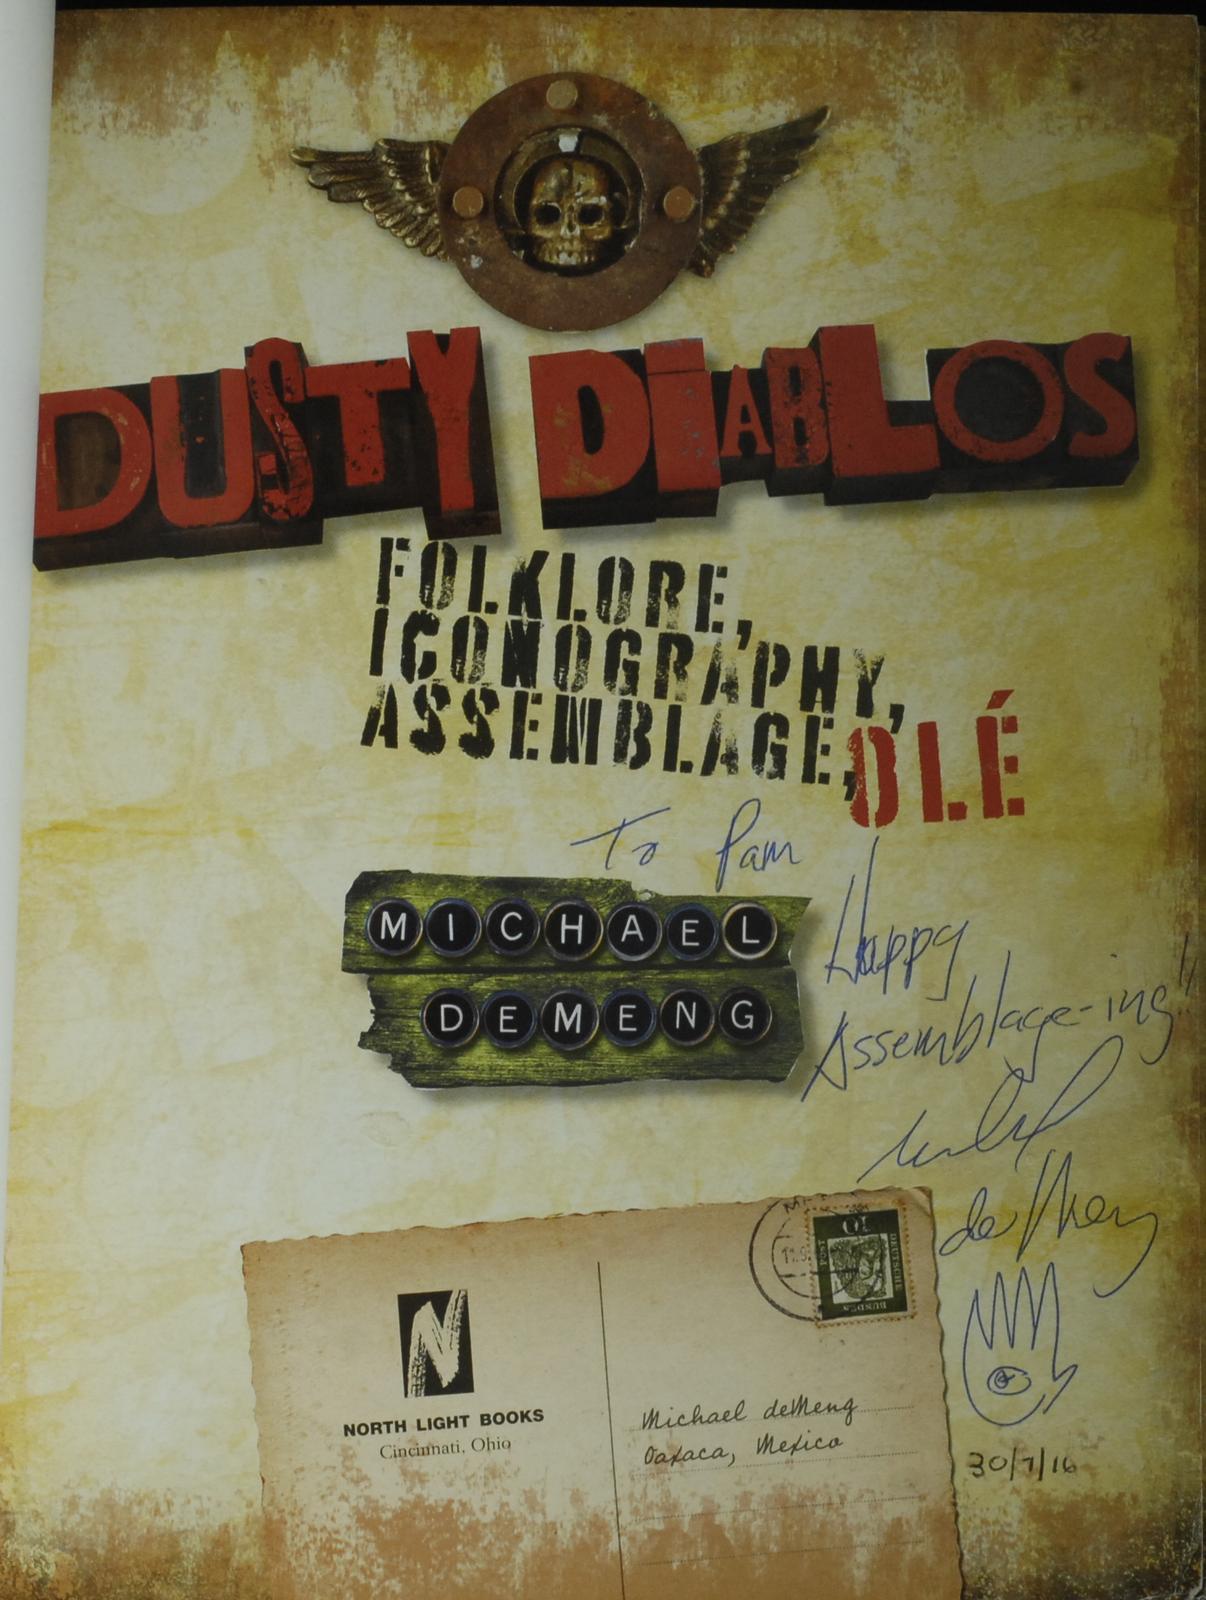 mbb006746c_-_DeMeng_Michael_-_Dusty_Diablos_Folklore_Iconography_Assemblage_Ole_-_Contains_Illustrations.jpg